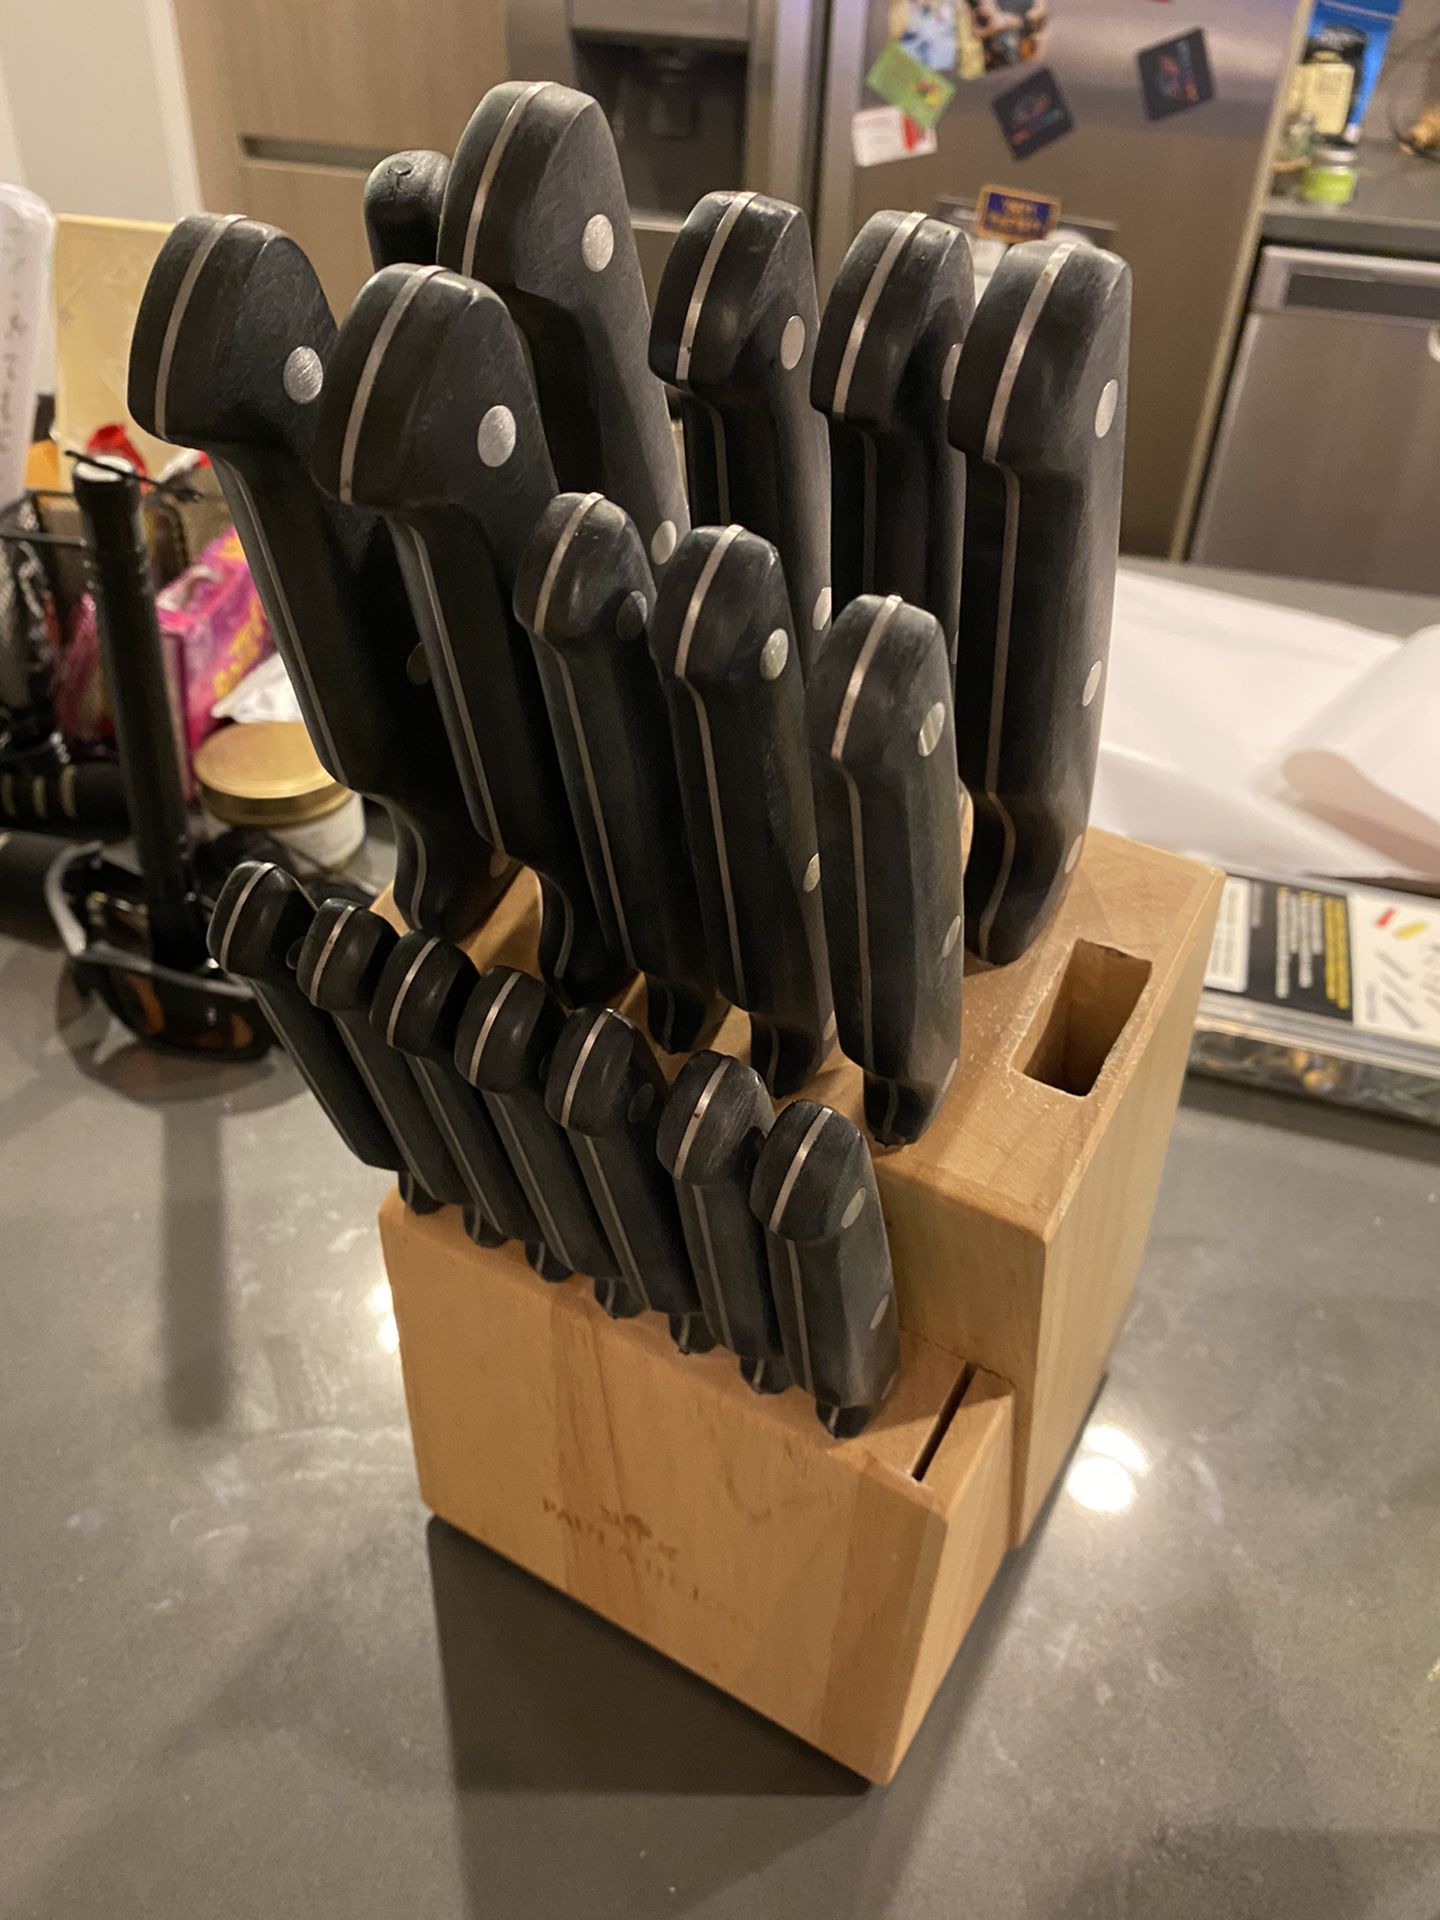 Knife Sets for sale in Easterly, Texas